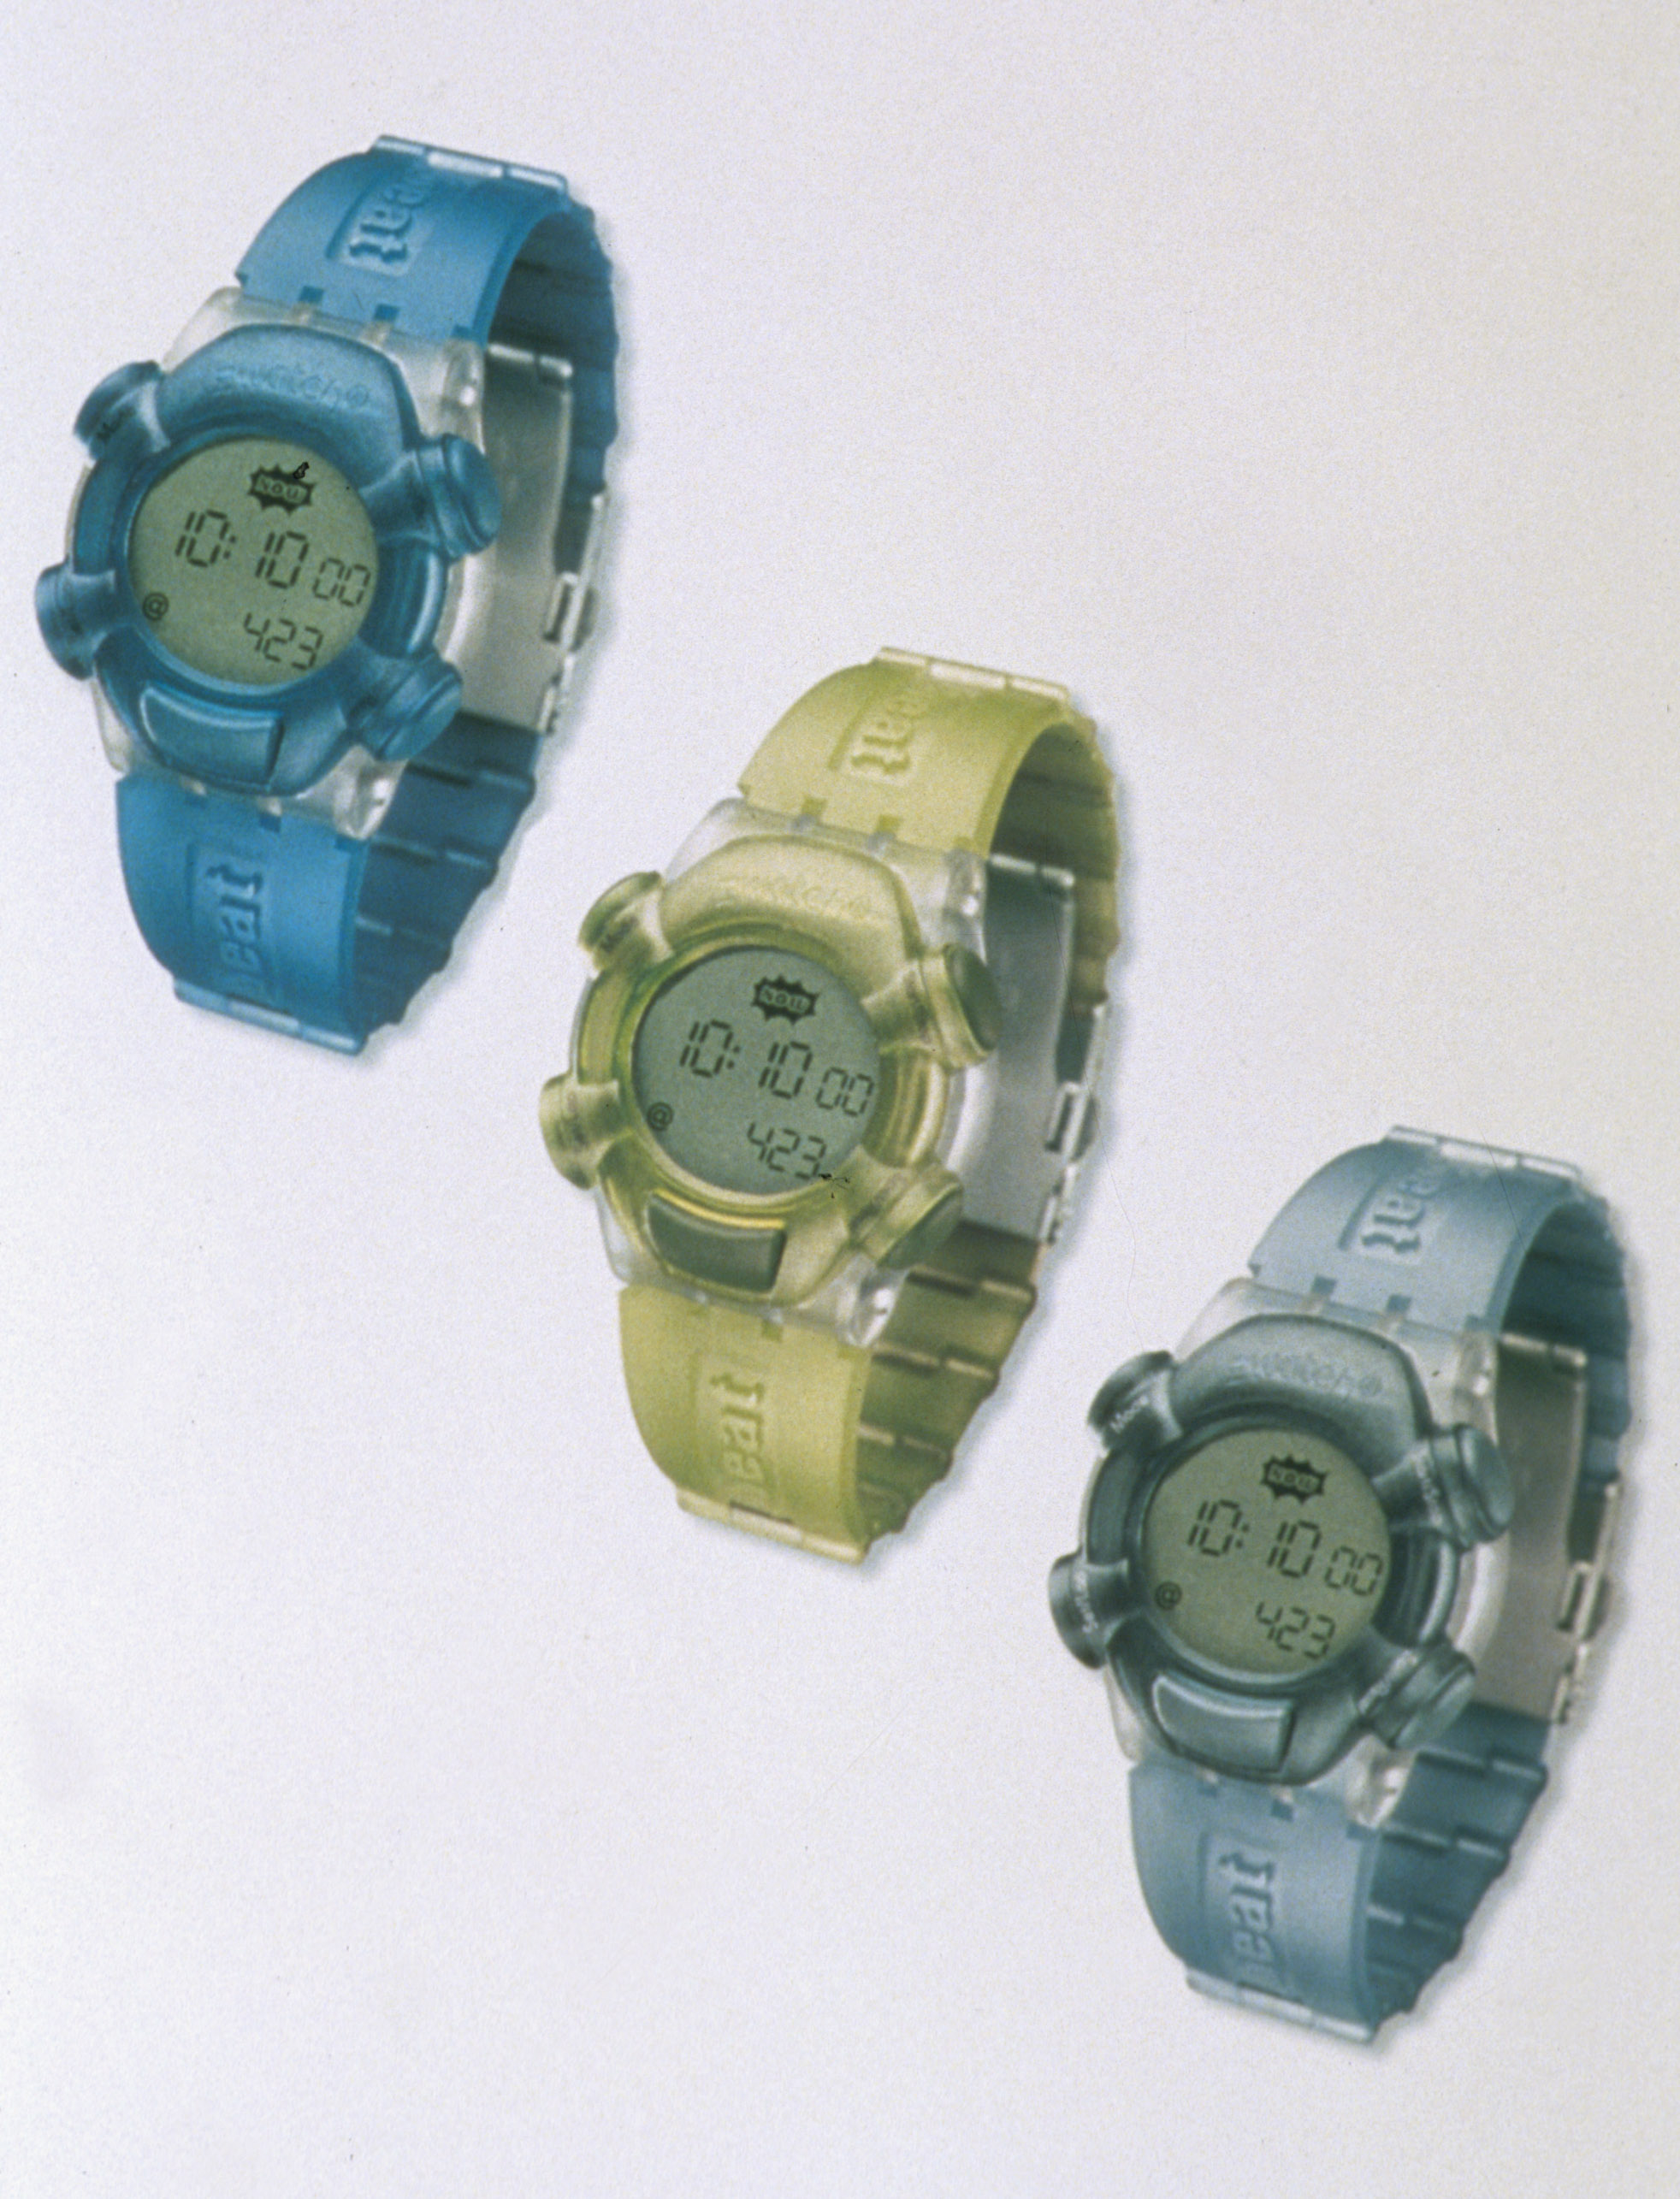 Remember When Swatch Invented a Time System for the Internet?